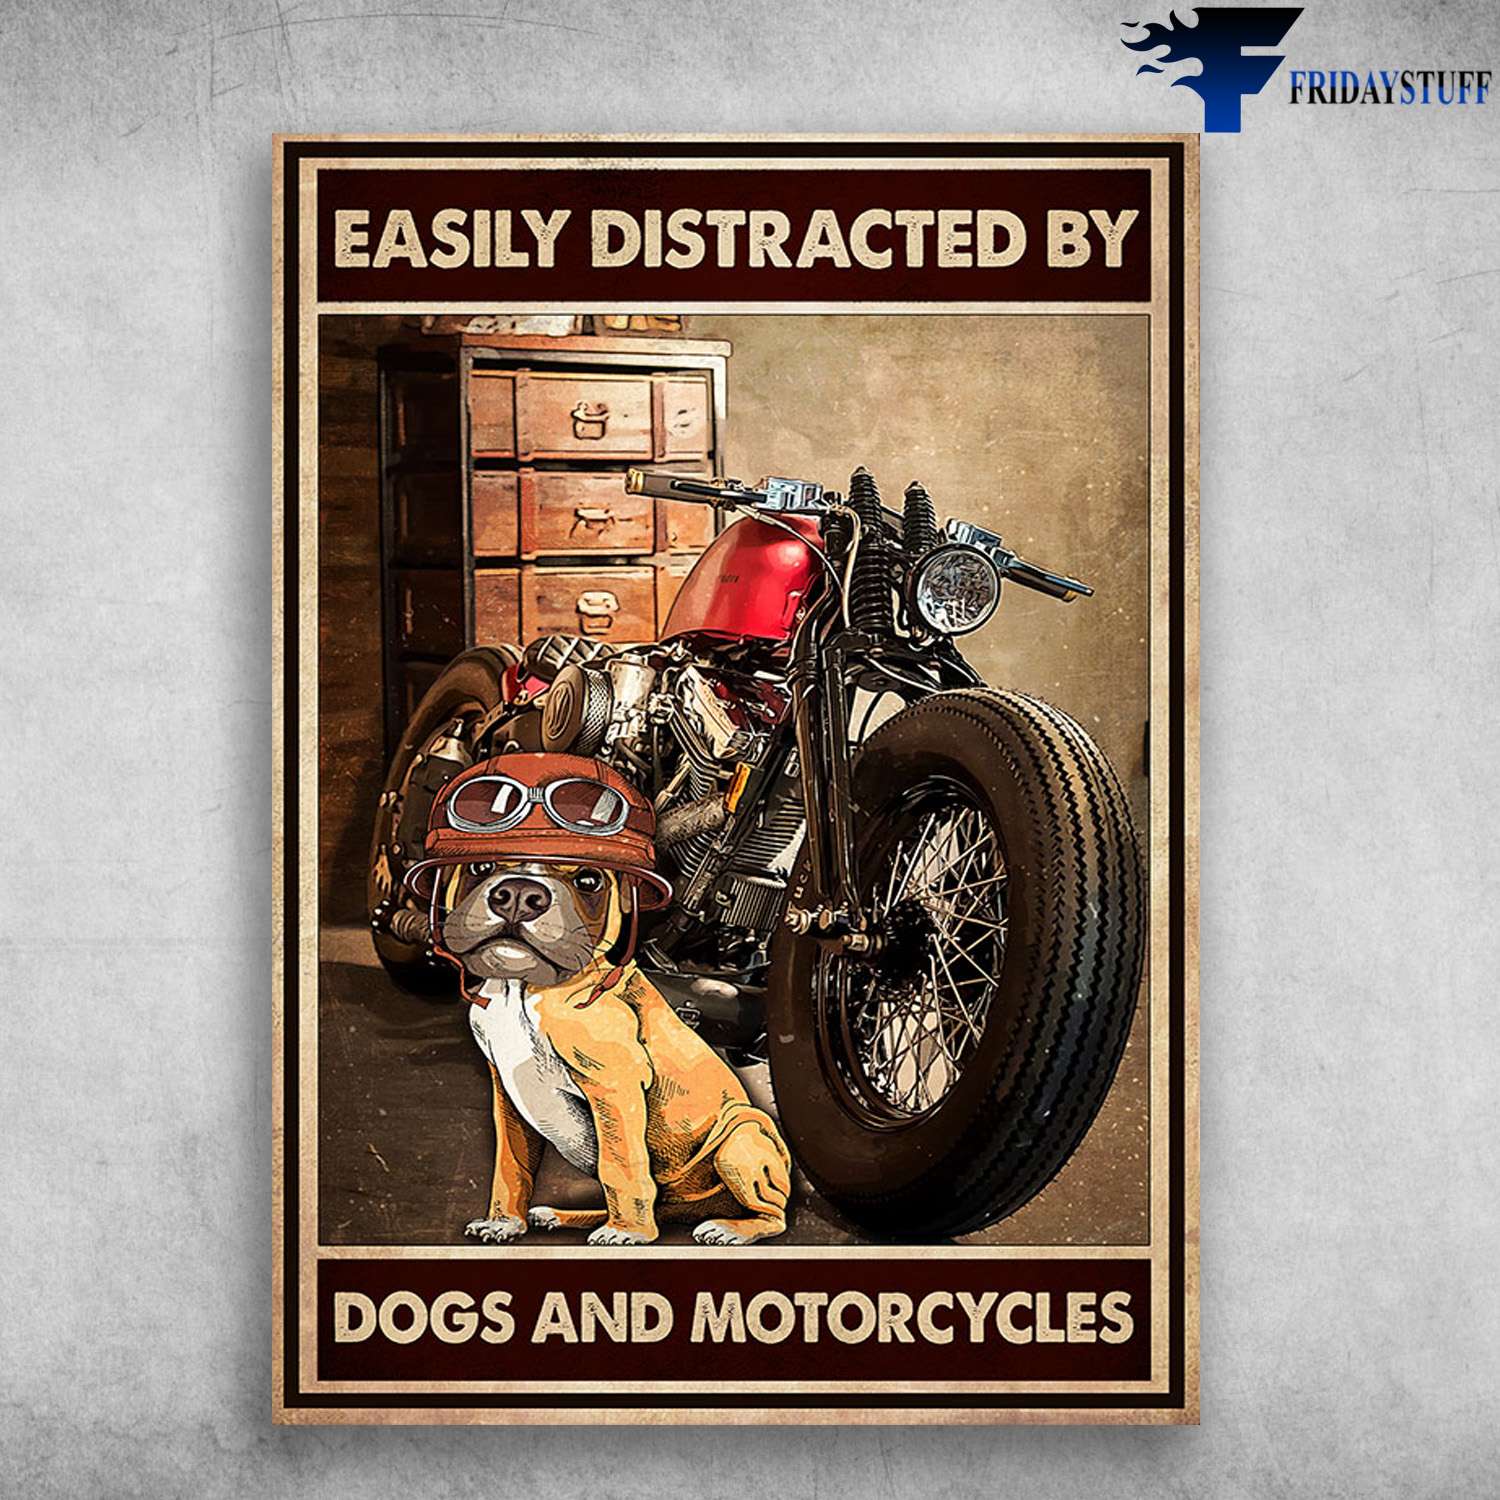 Racing Dog, Motorcycle Lover - Rasily Distracted By, Dog And Motorcycles